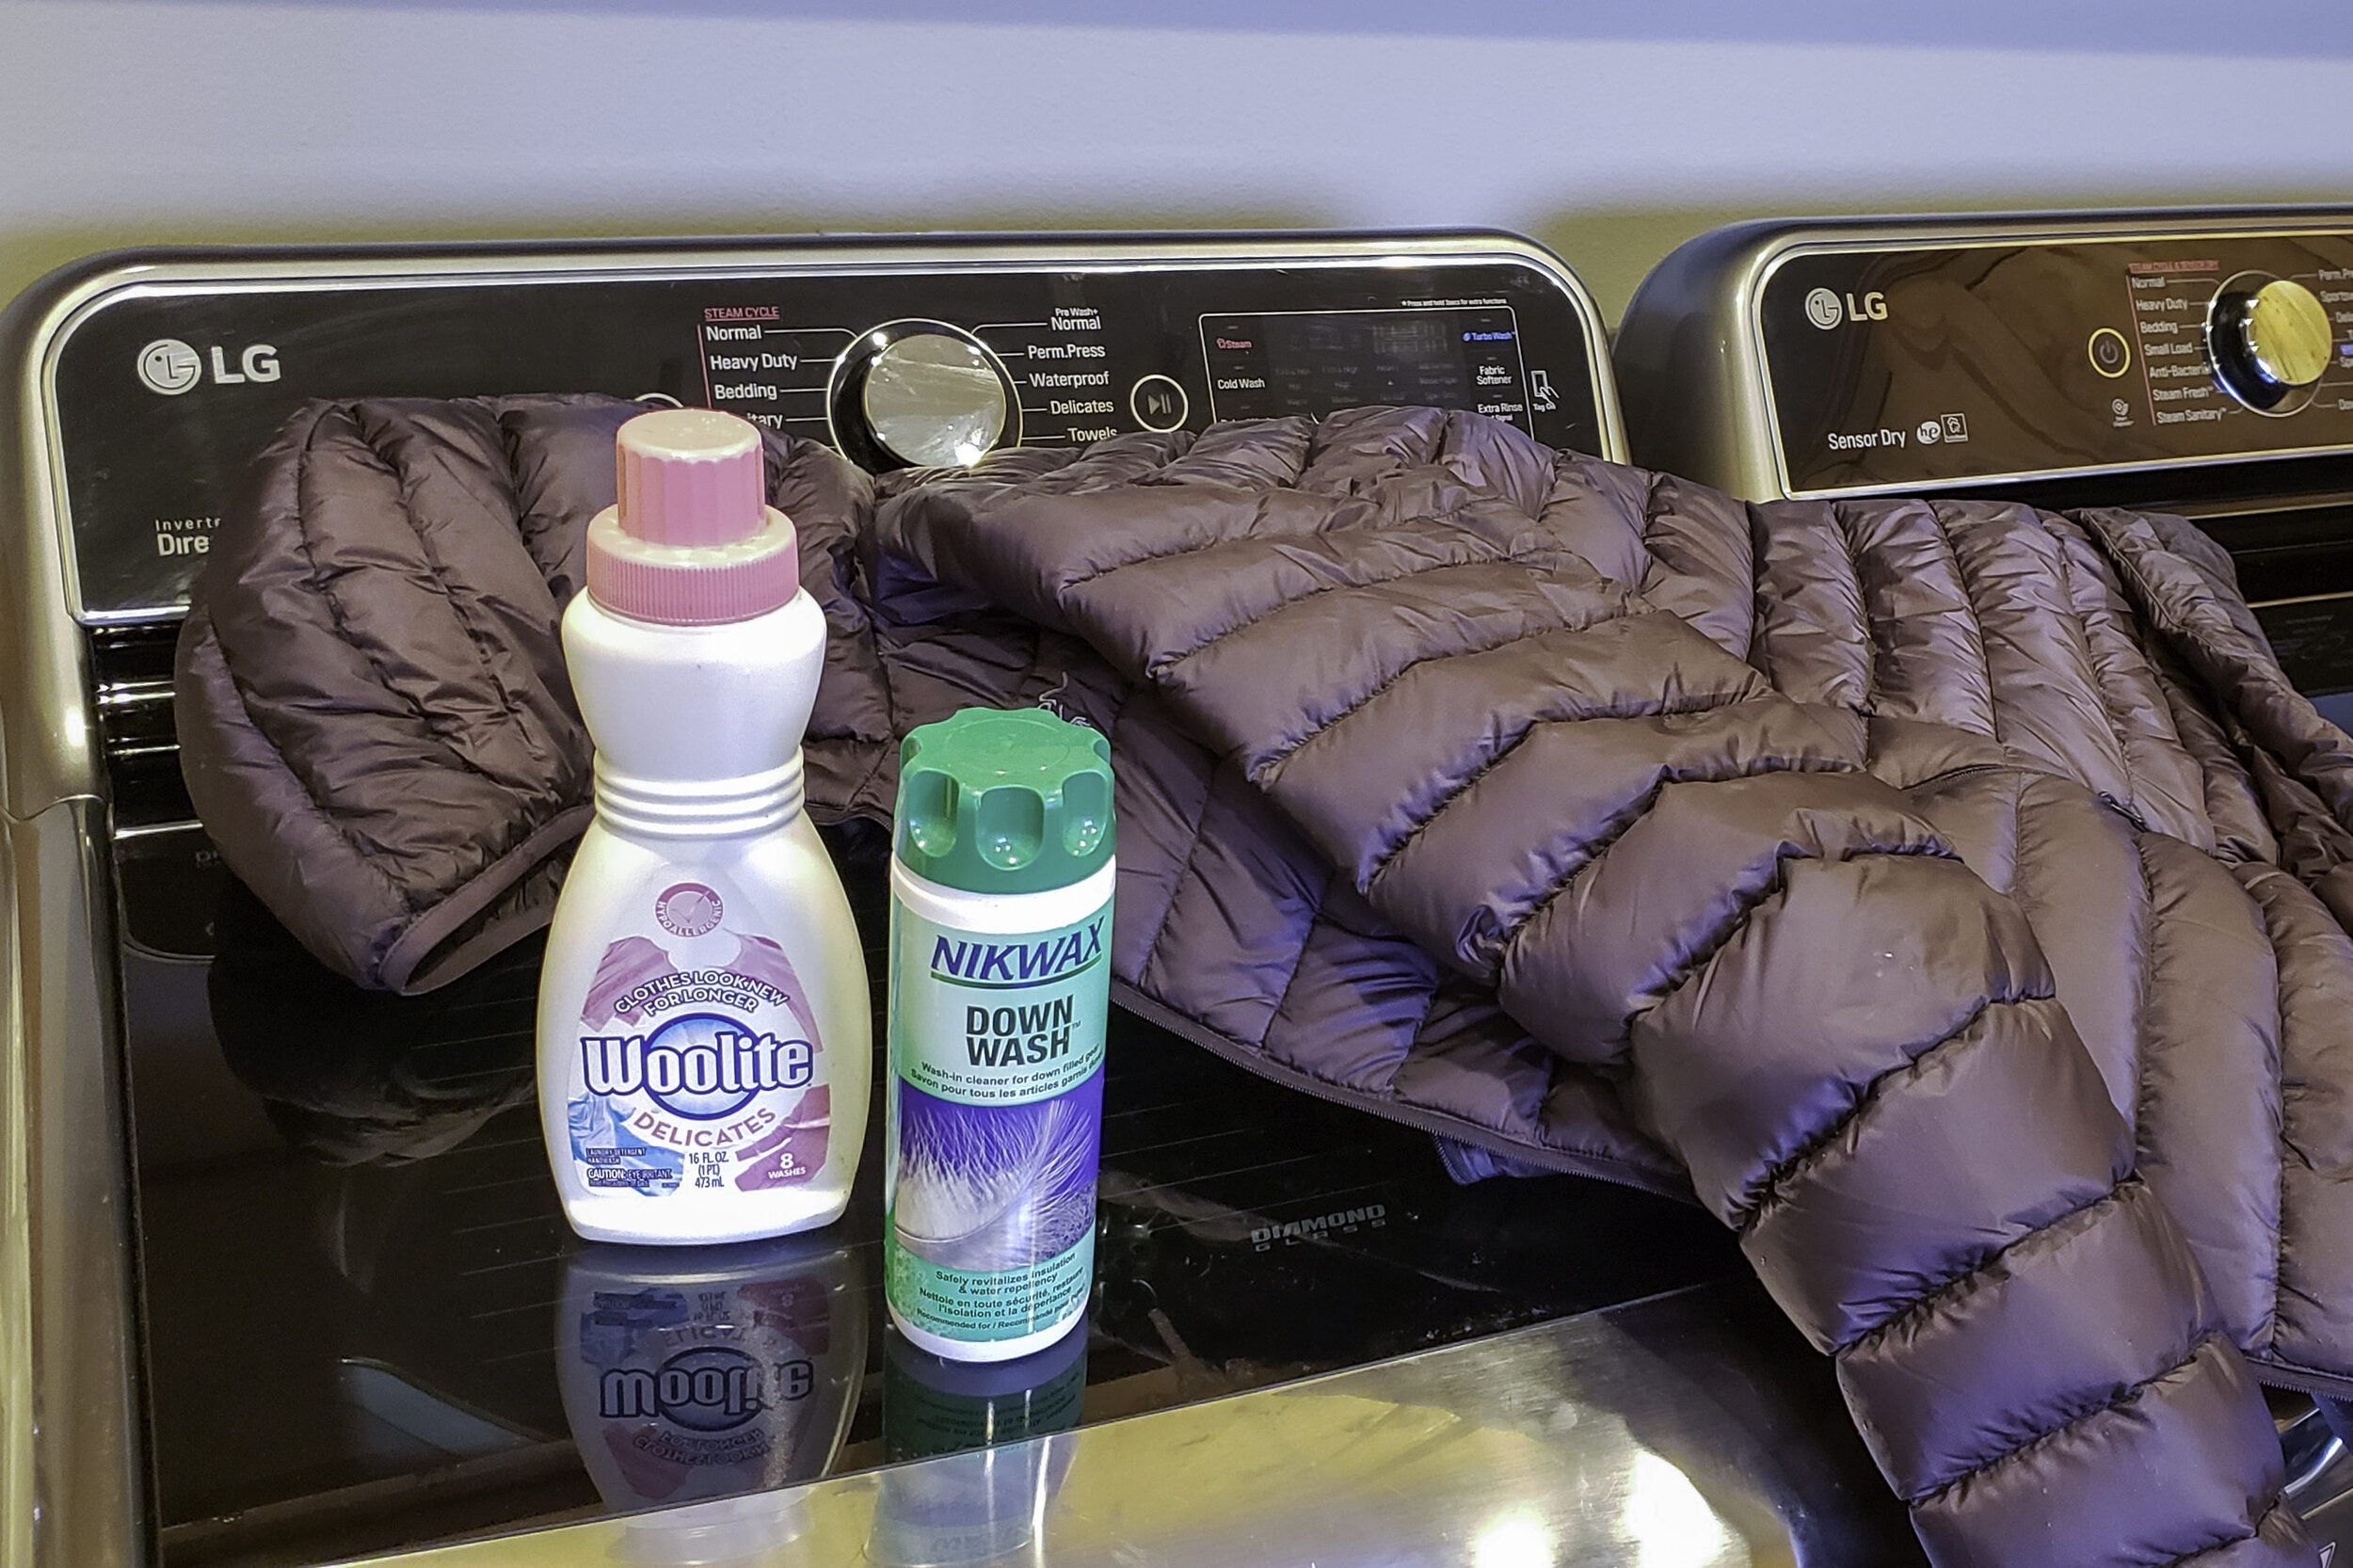 We recommend using Nikwax Down Wash for your jacket, but a gentle detergent like Woolite will work in a pinch.